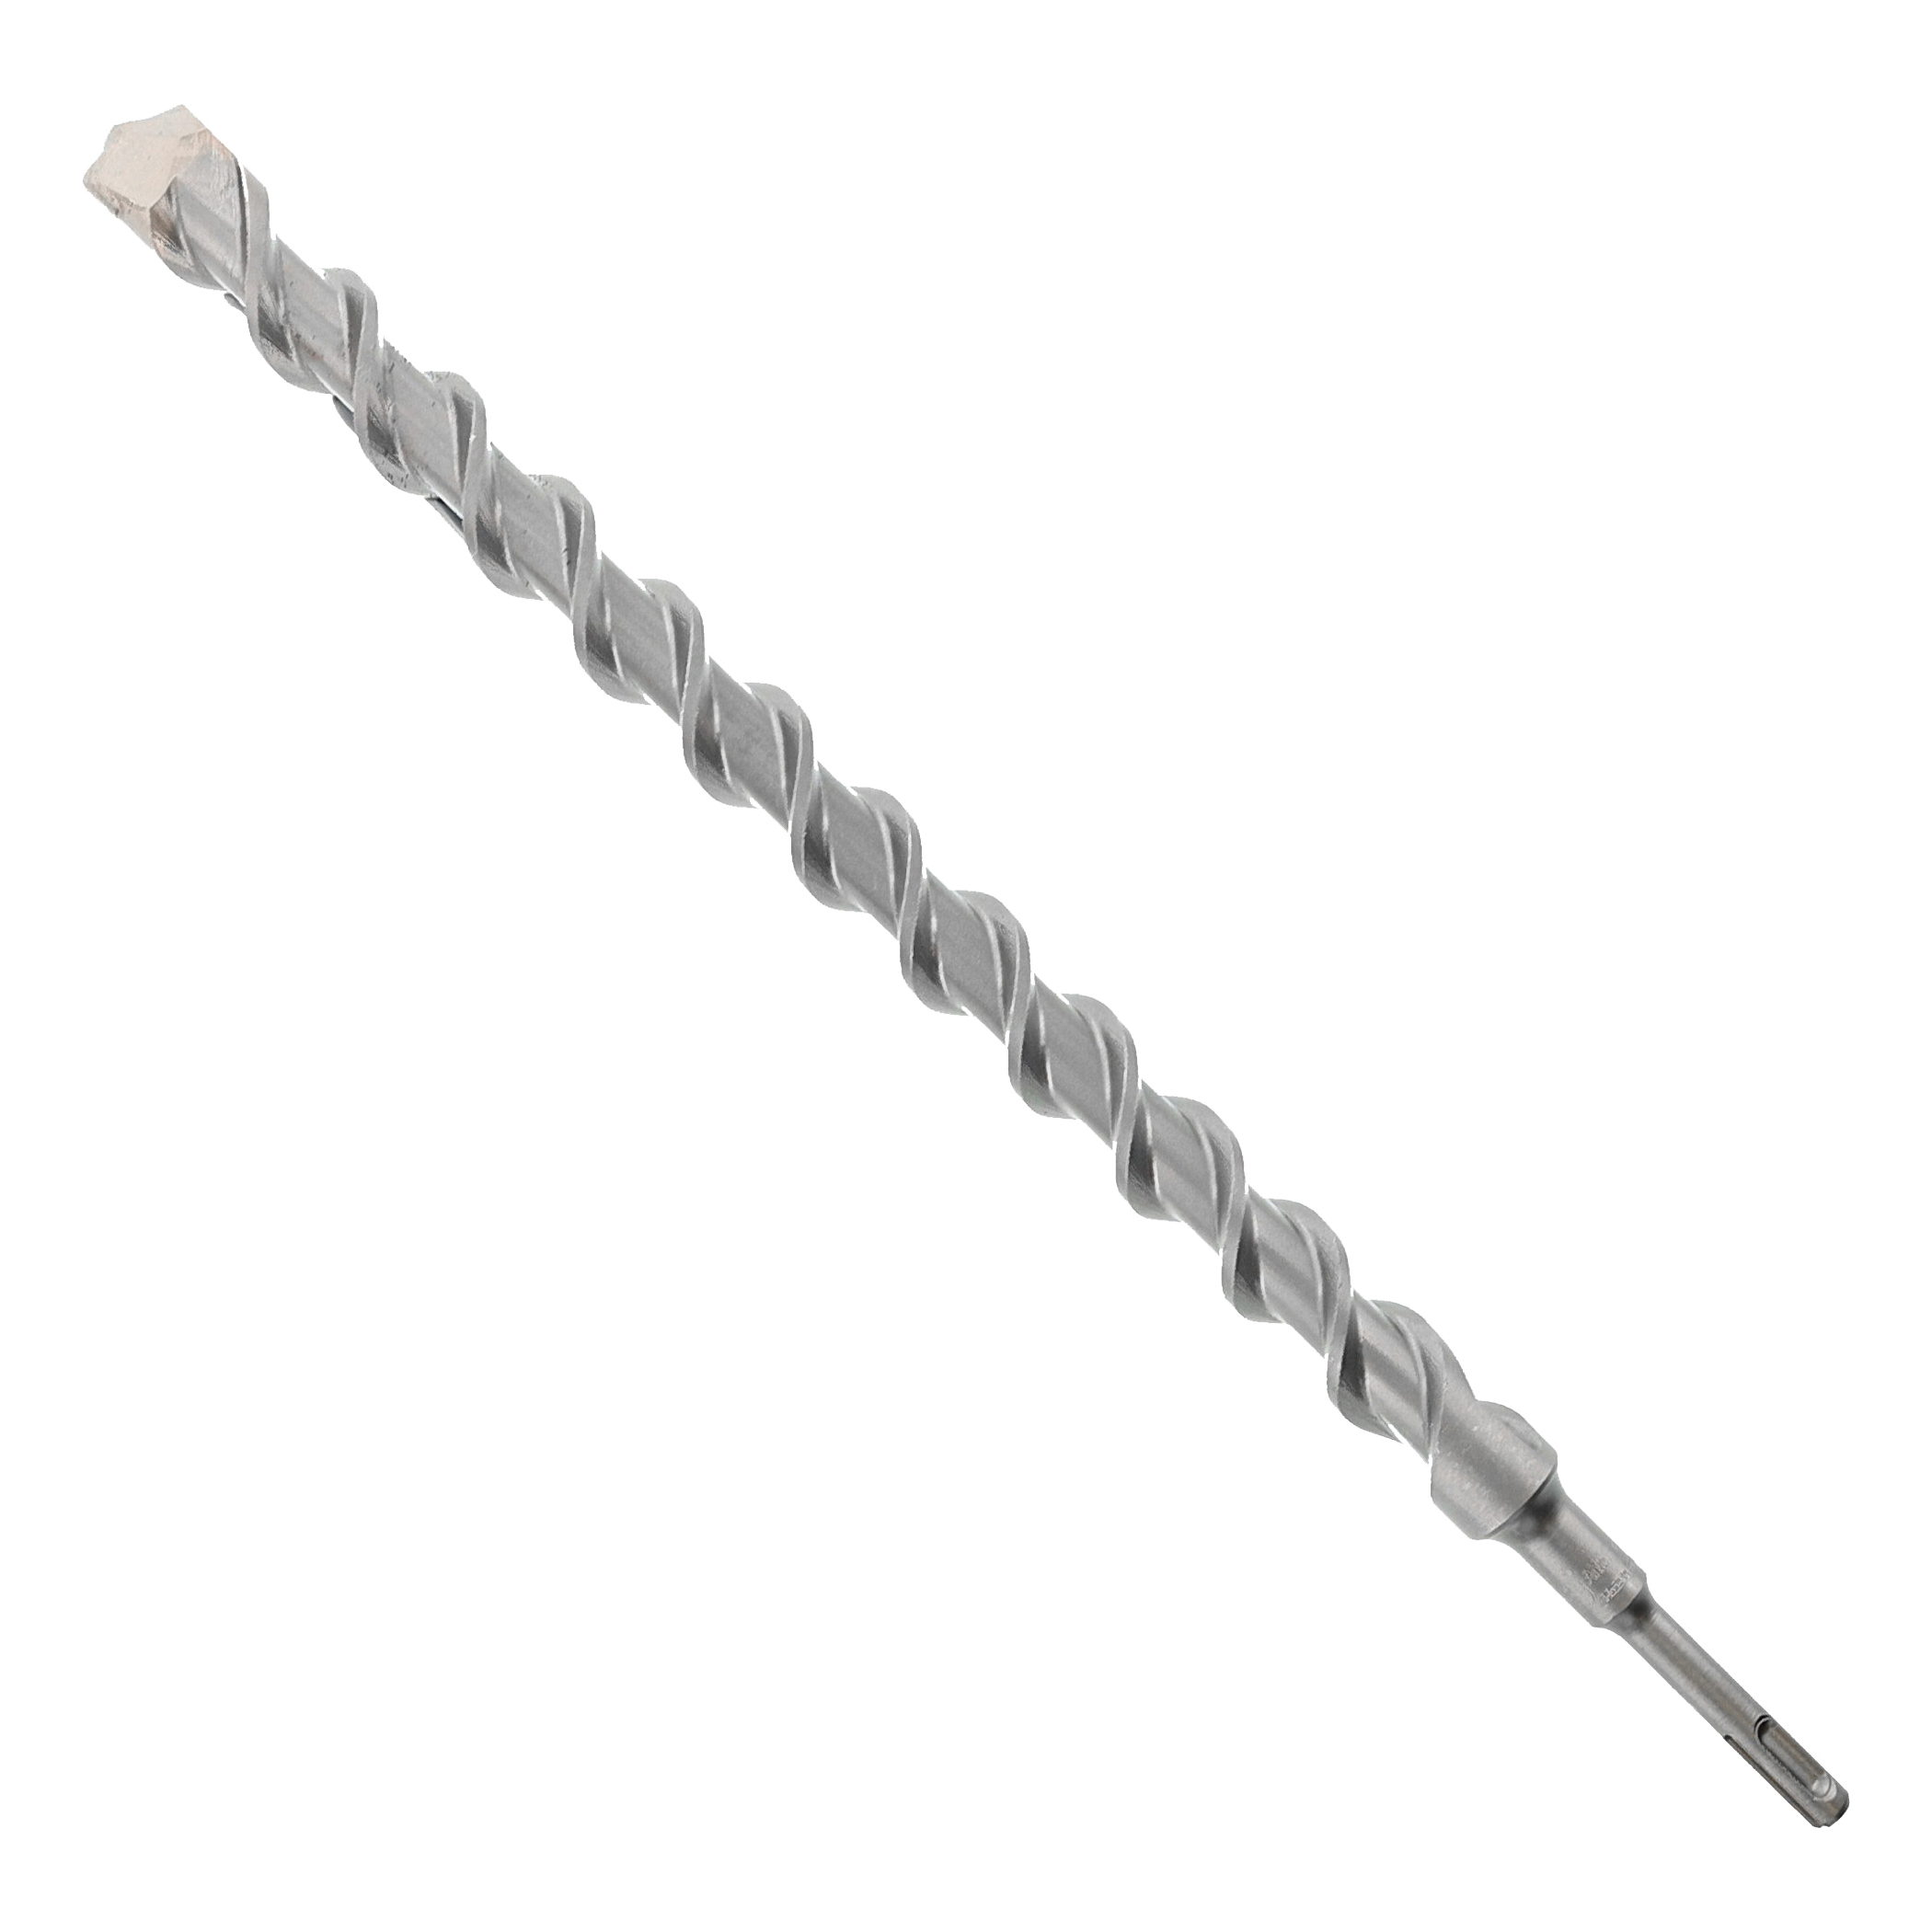 DMAPL2530 Hammer Drill Bit, 1 in Dia, 18 in OAL, Percussion, 4-Flute, SDS Plus Shank